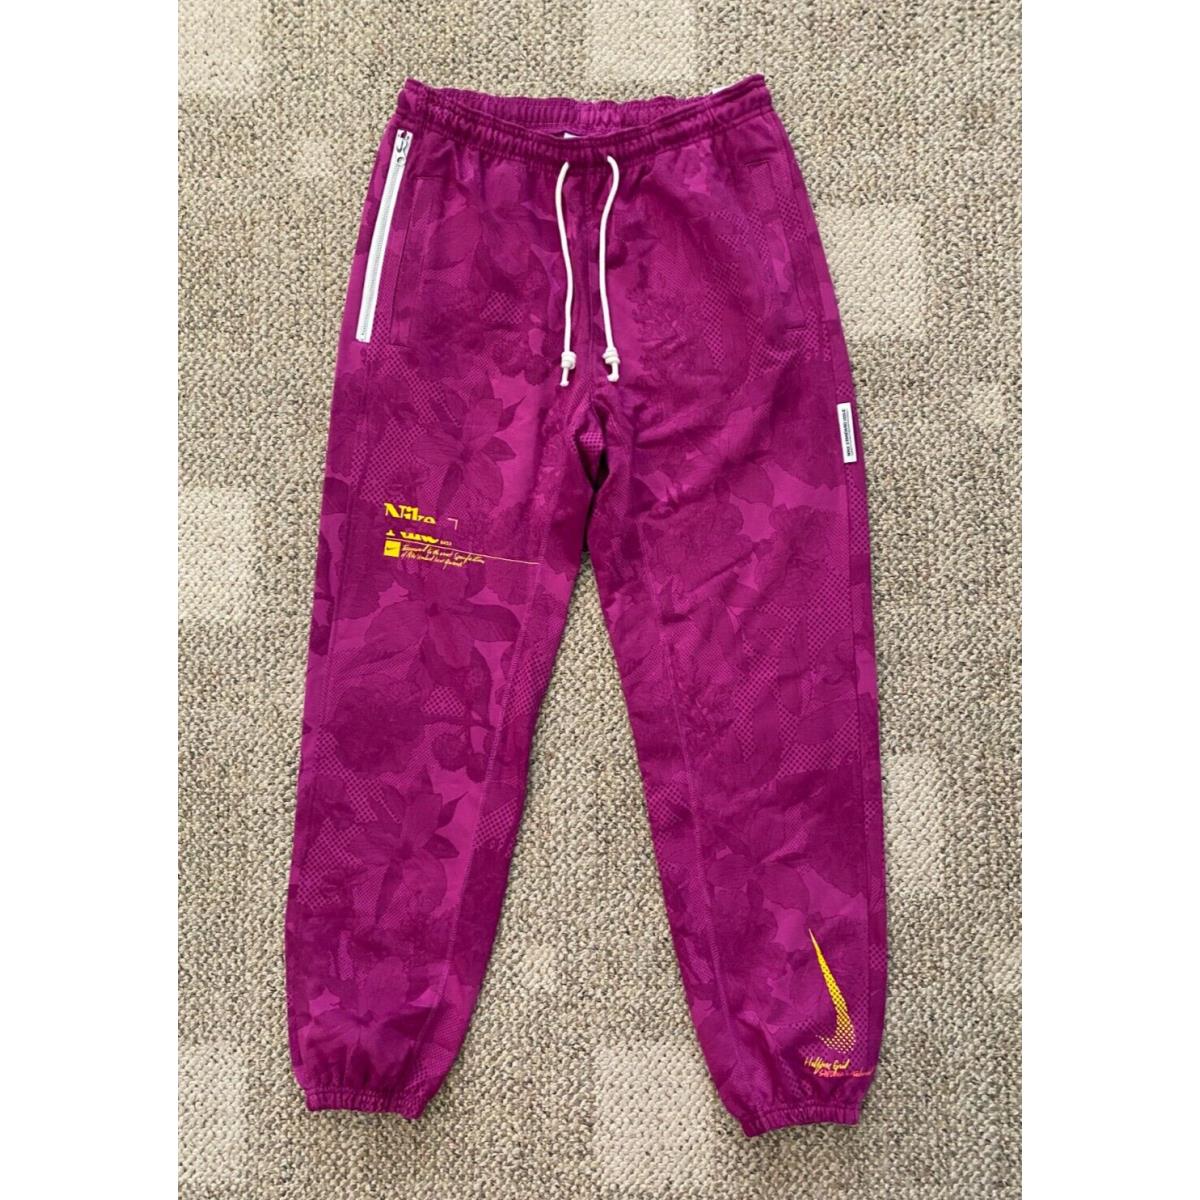 Men`s Size M Nike Standard Issue Basketball Jogger Athletic Pants Berry DV0016